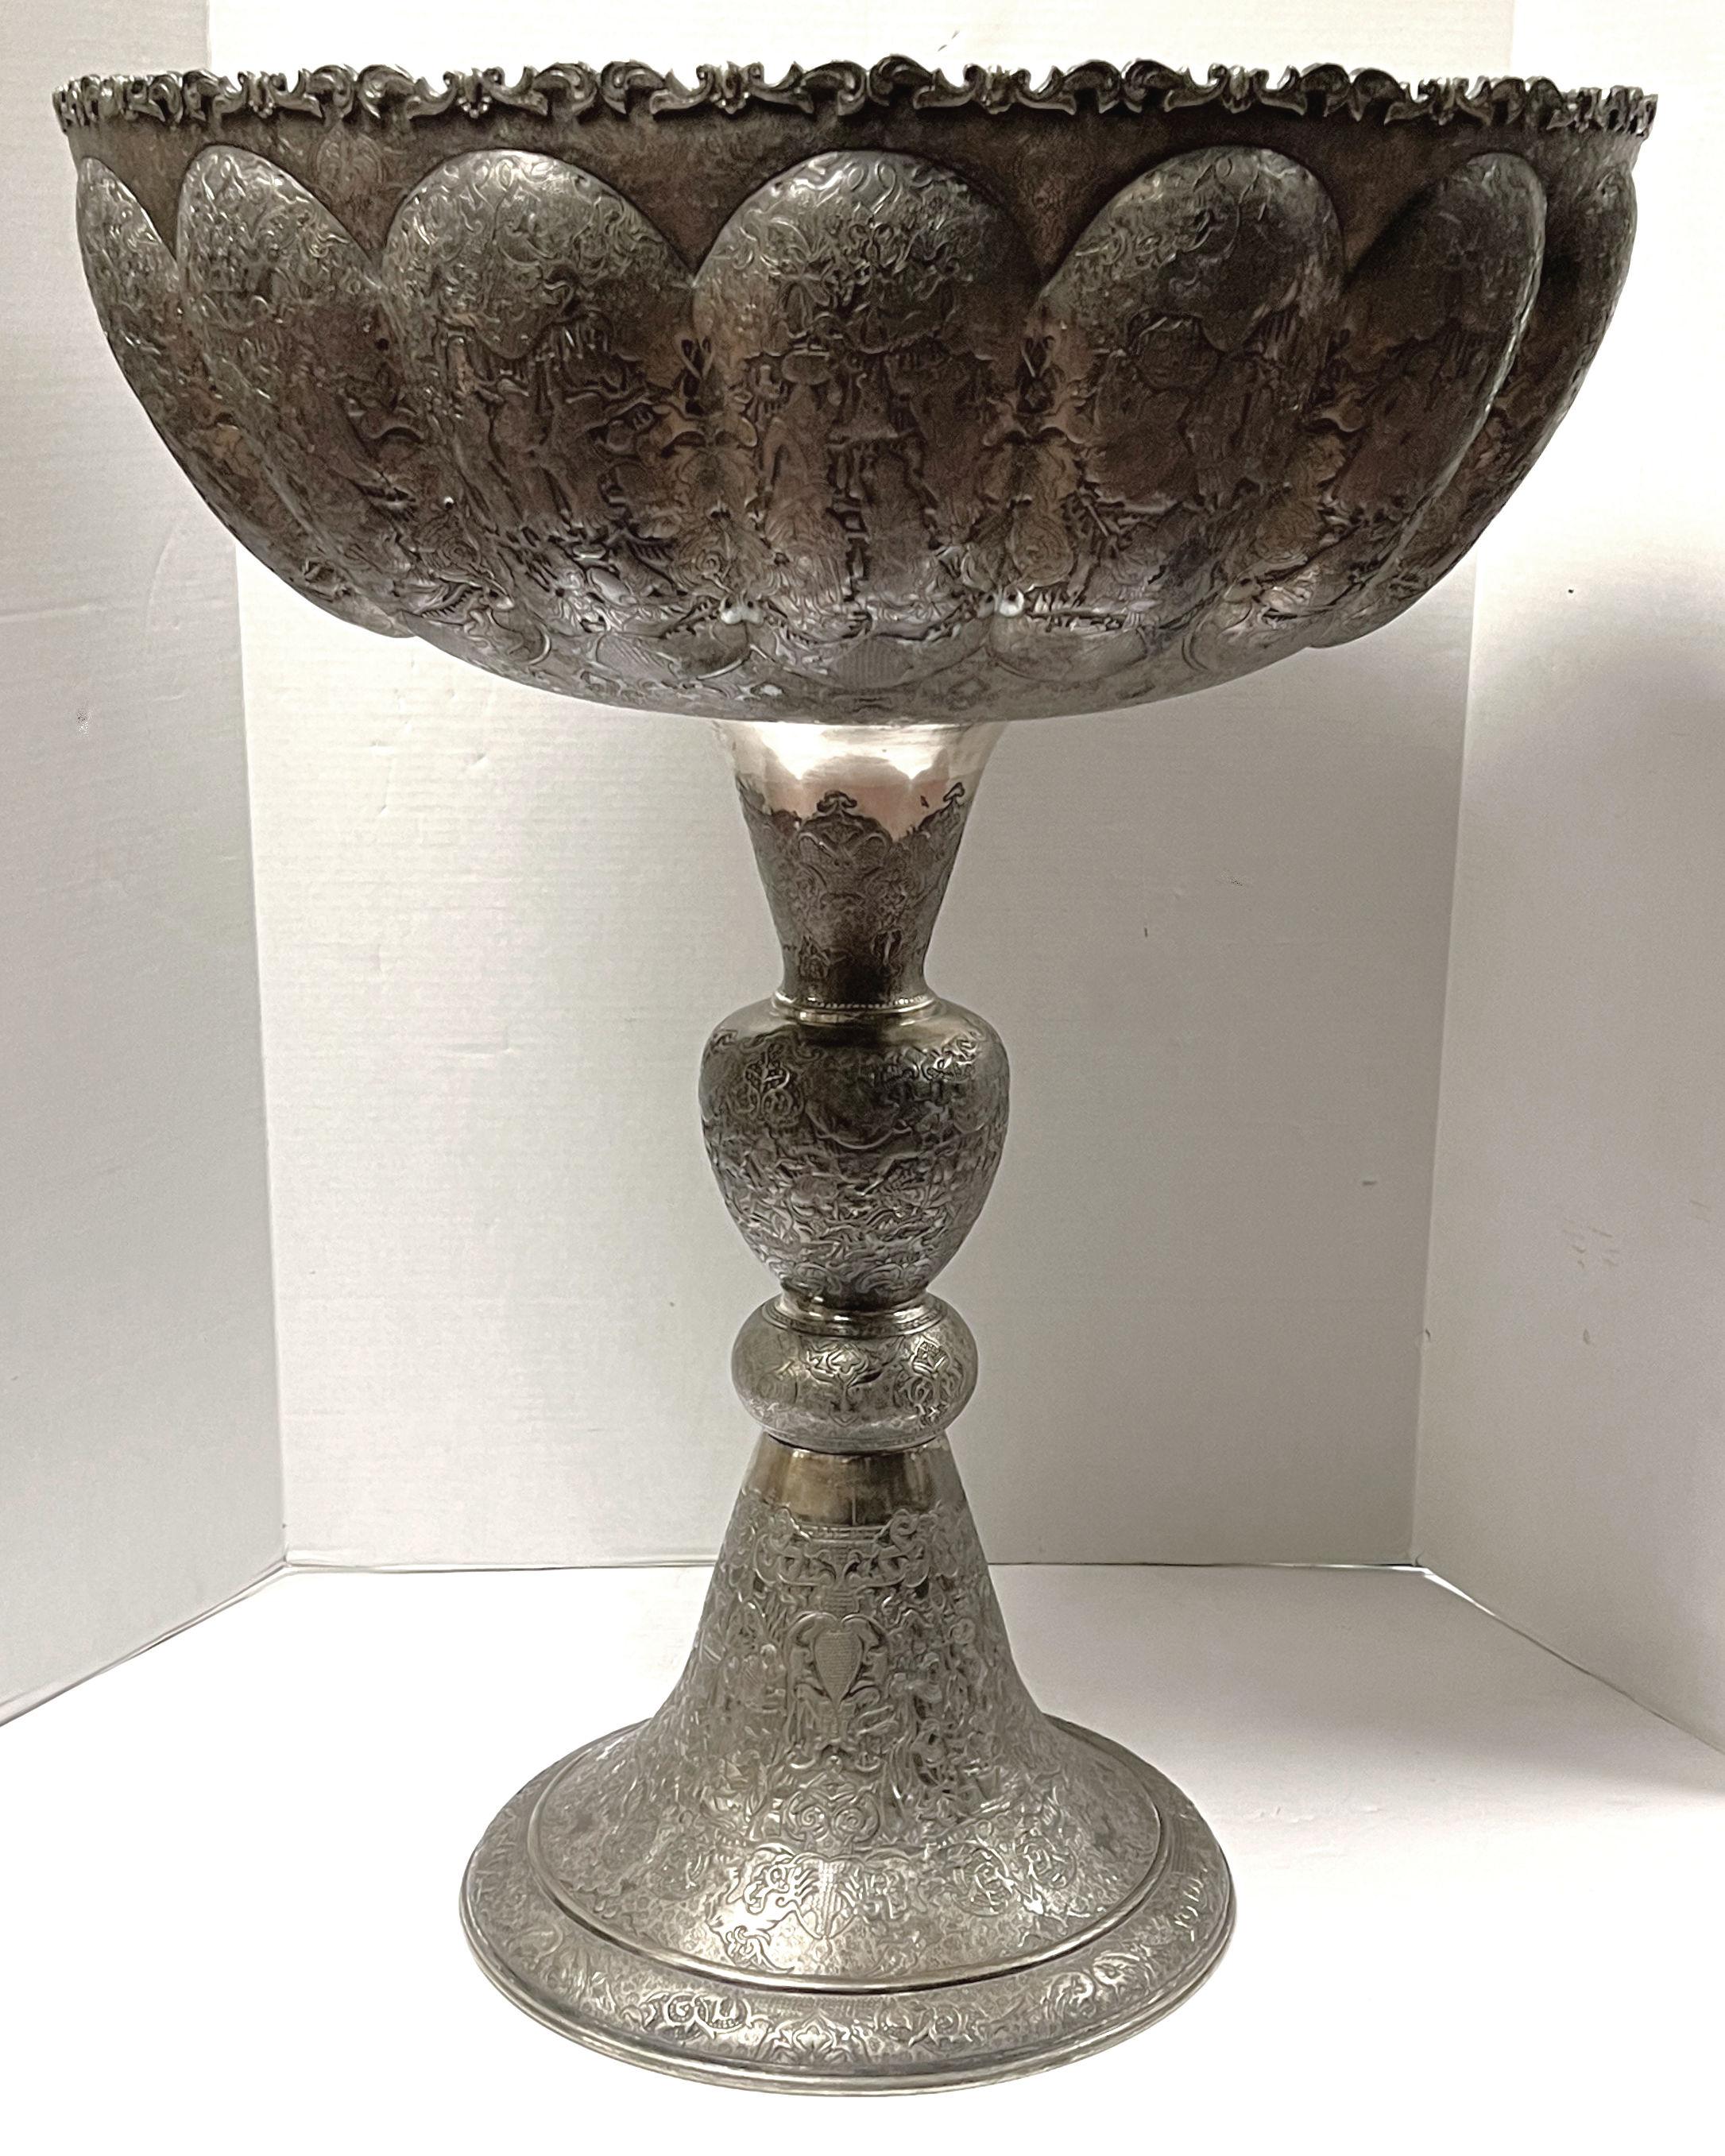 Finest quality palace size Persian Repousse Silver Punch Bowl. 
This is the finest quality repousse chasing for this type of silver .

304 ounces, 277 troy ounces, 8.6 kg.